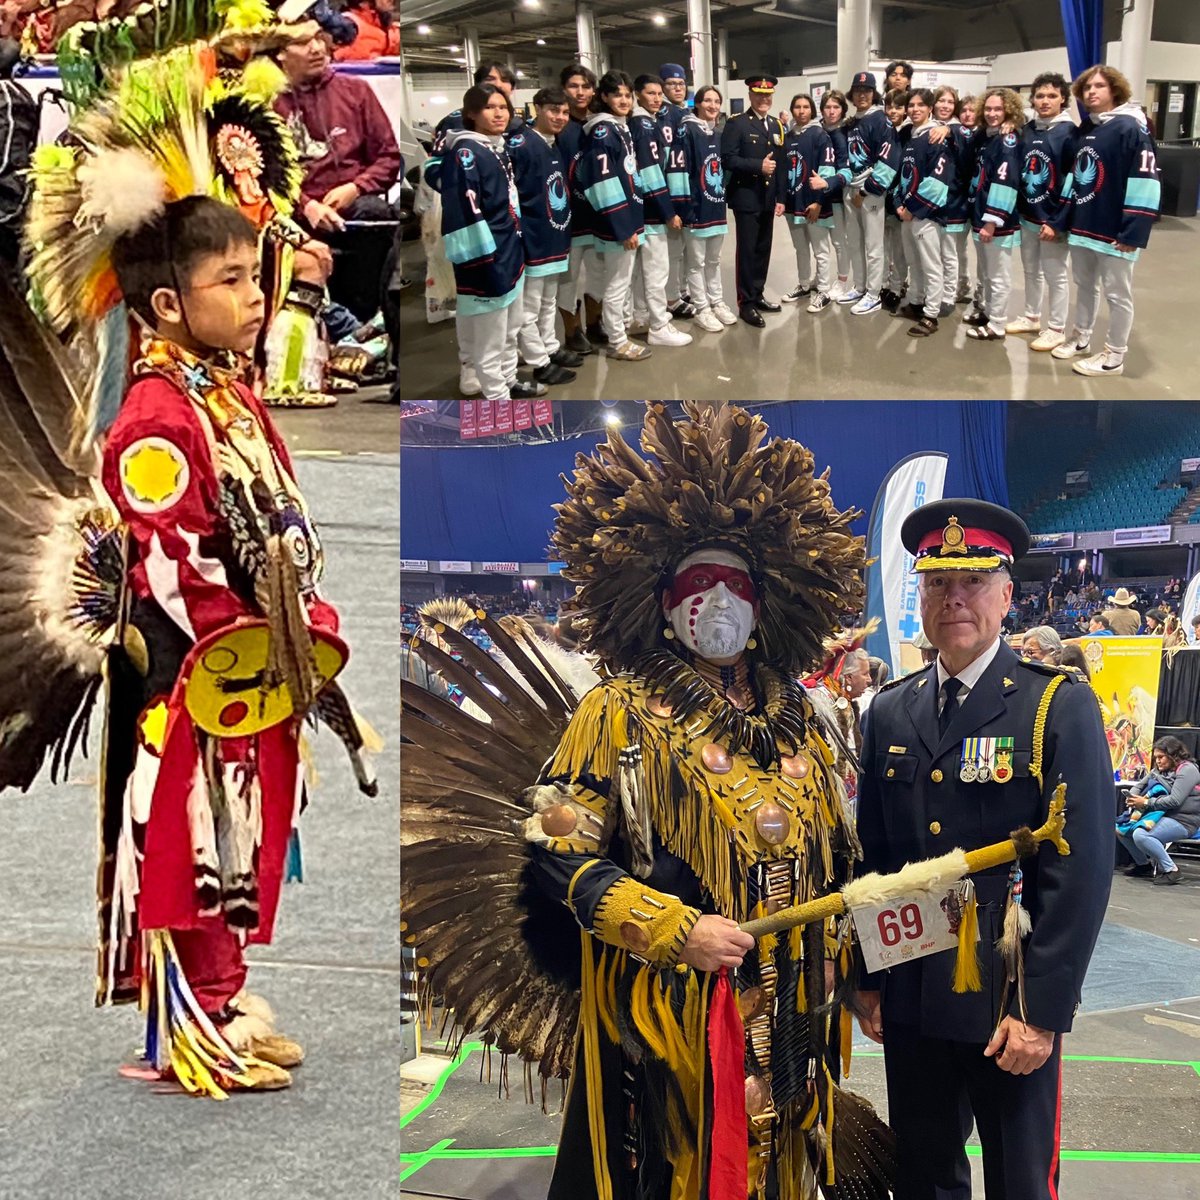 Special thanks to Vice Chief Lerat & the FSIN Administration for the invitation to participate in tonight’s Powwow. A noticeable youthful representation is indicative of a positive future!